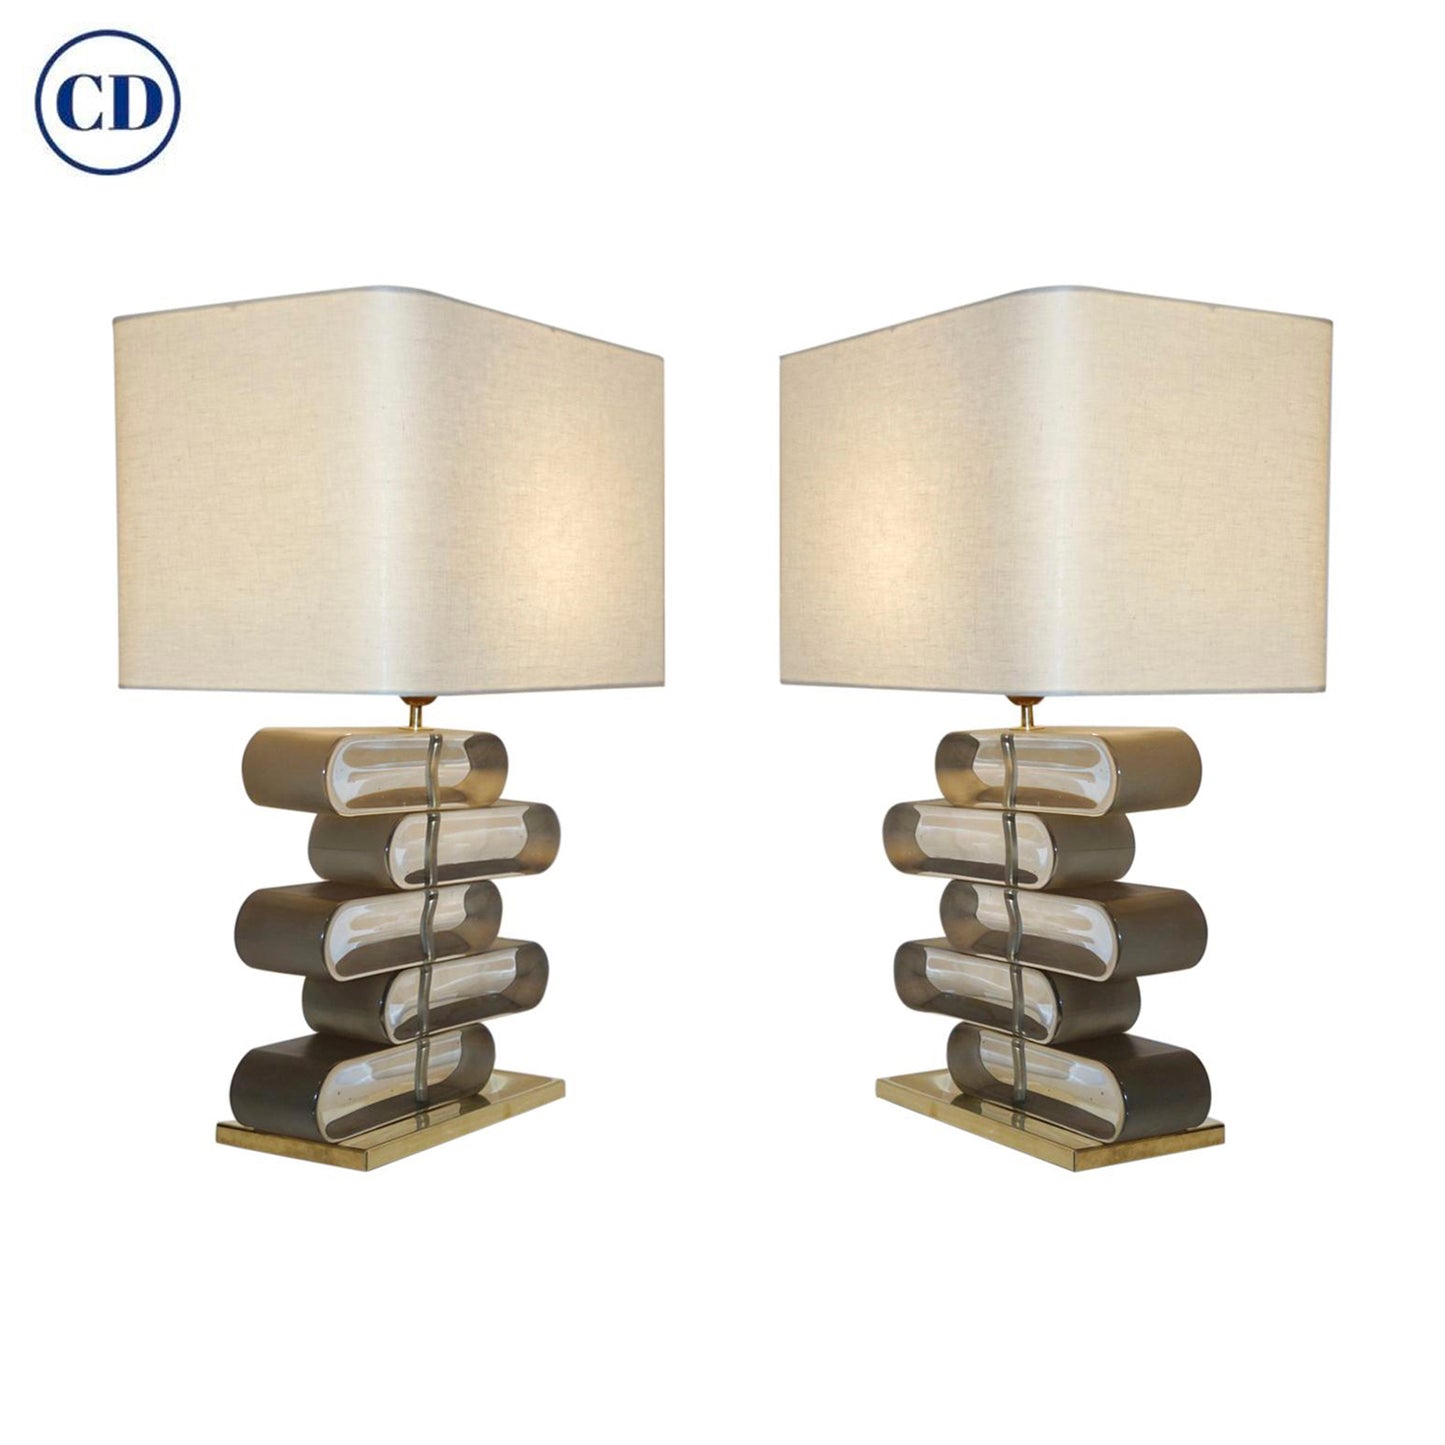 Italian Modern Pair of Brass and Bronze Murano Glass Architectural Table Lamps